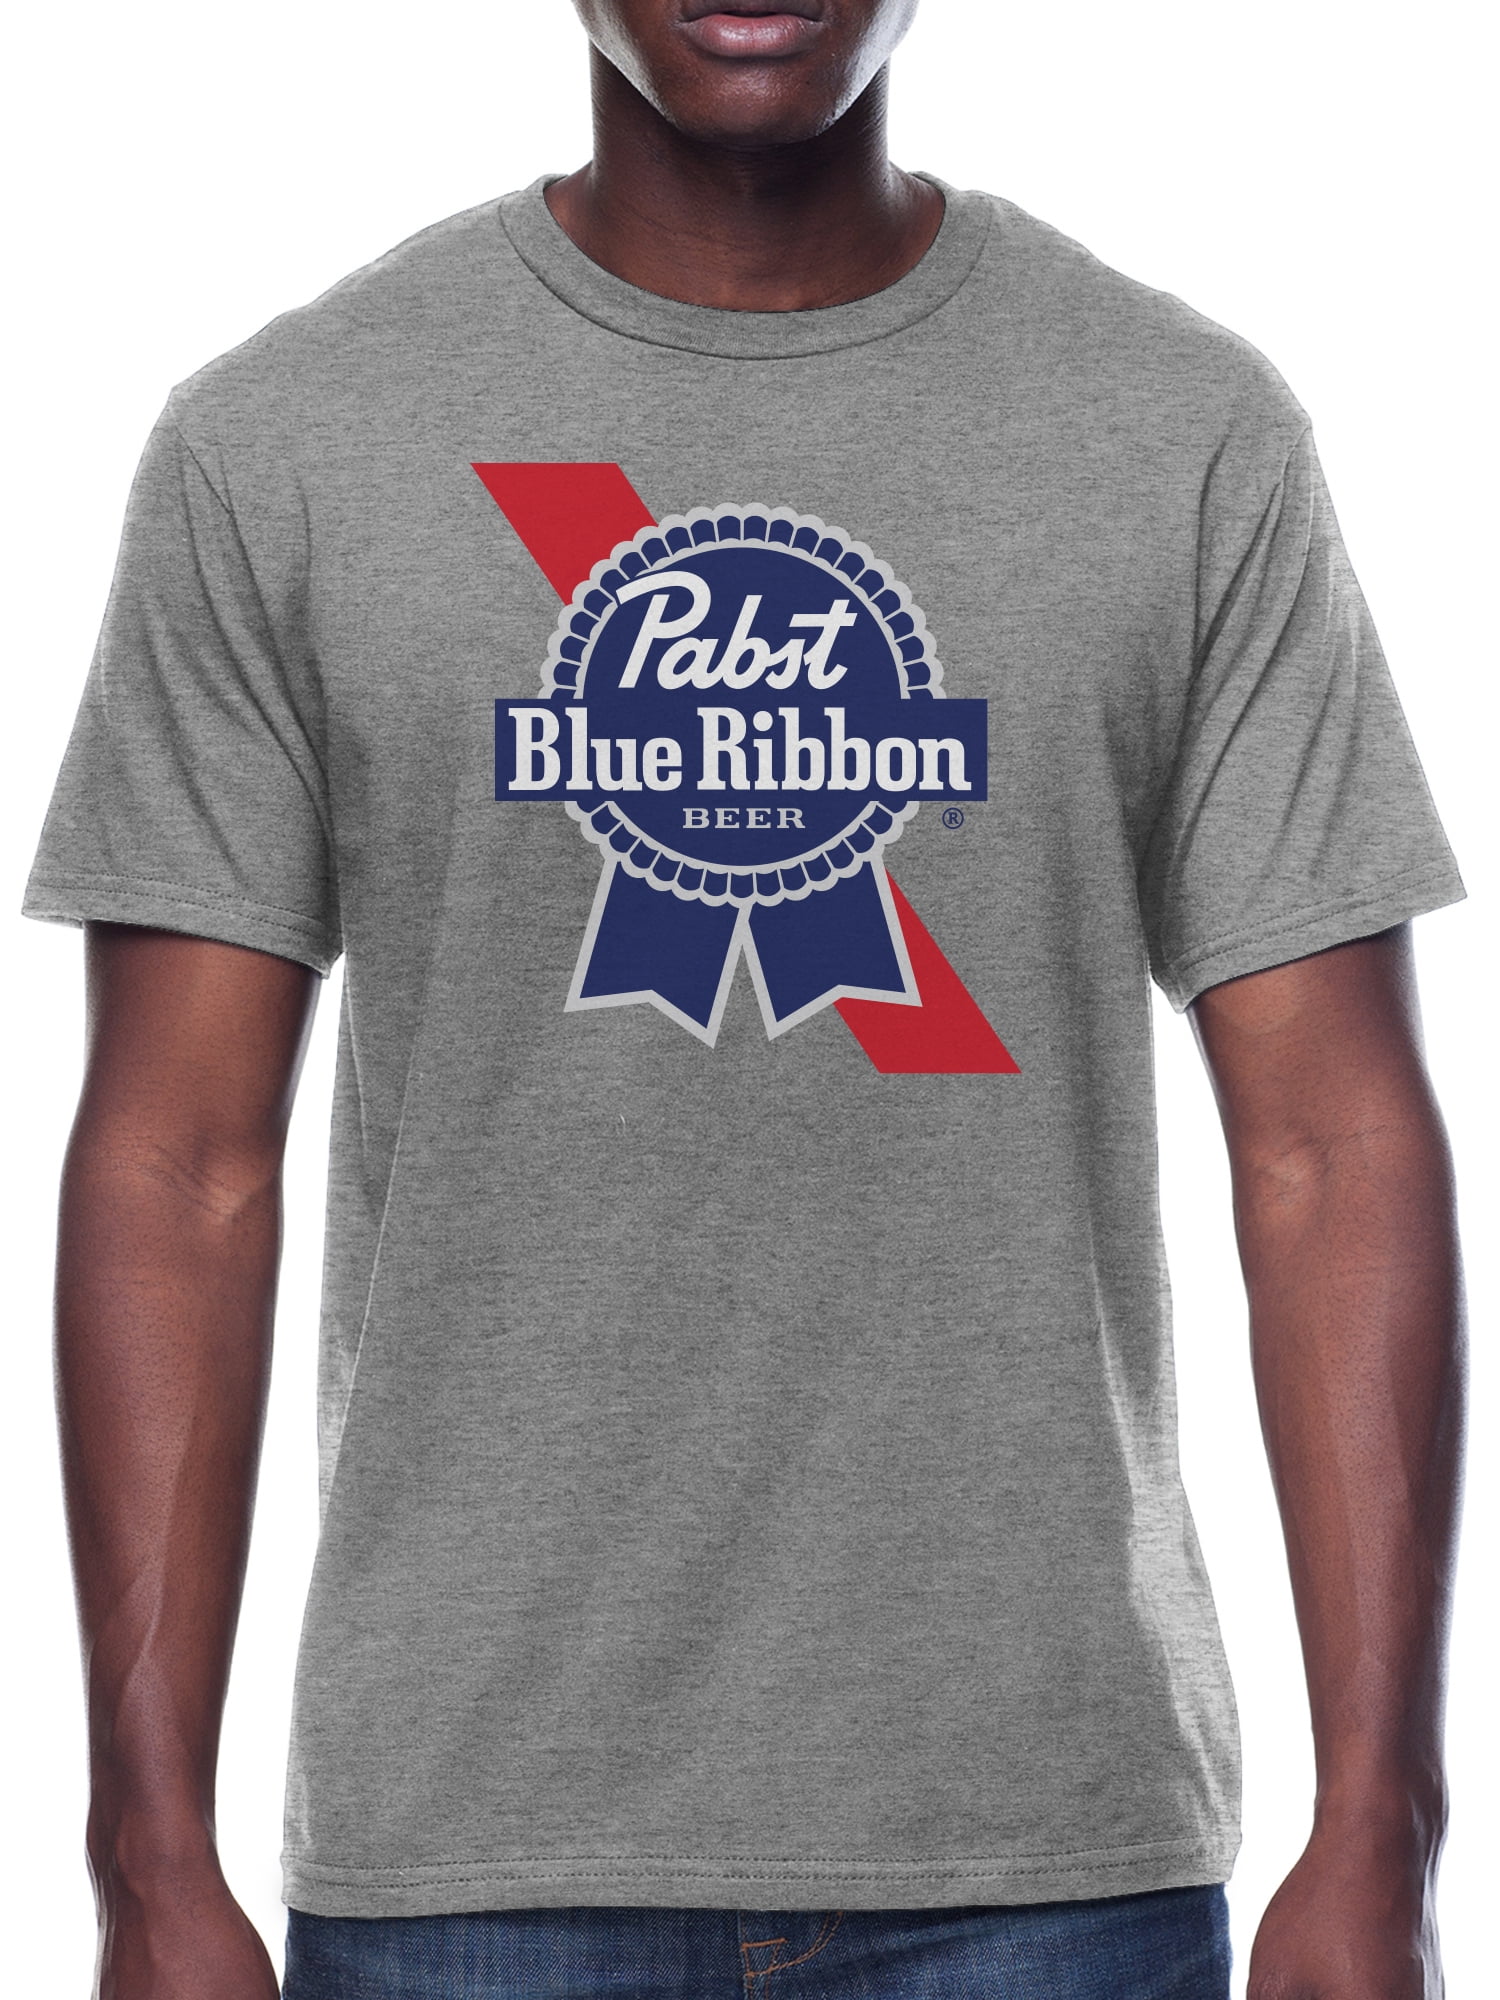 New Pabst Blue Ribbon Beer Logo White Standard T-Shirt Size S to 5XL 